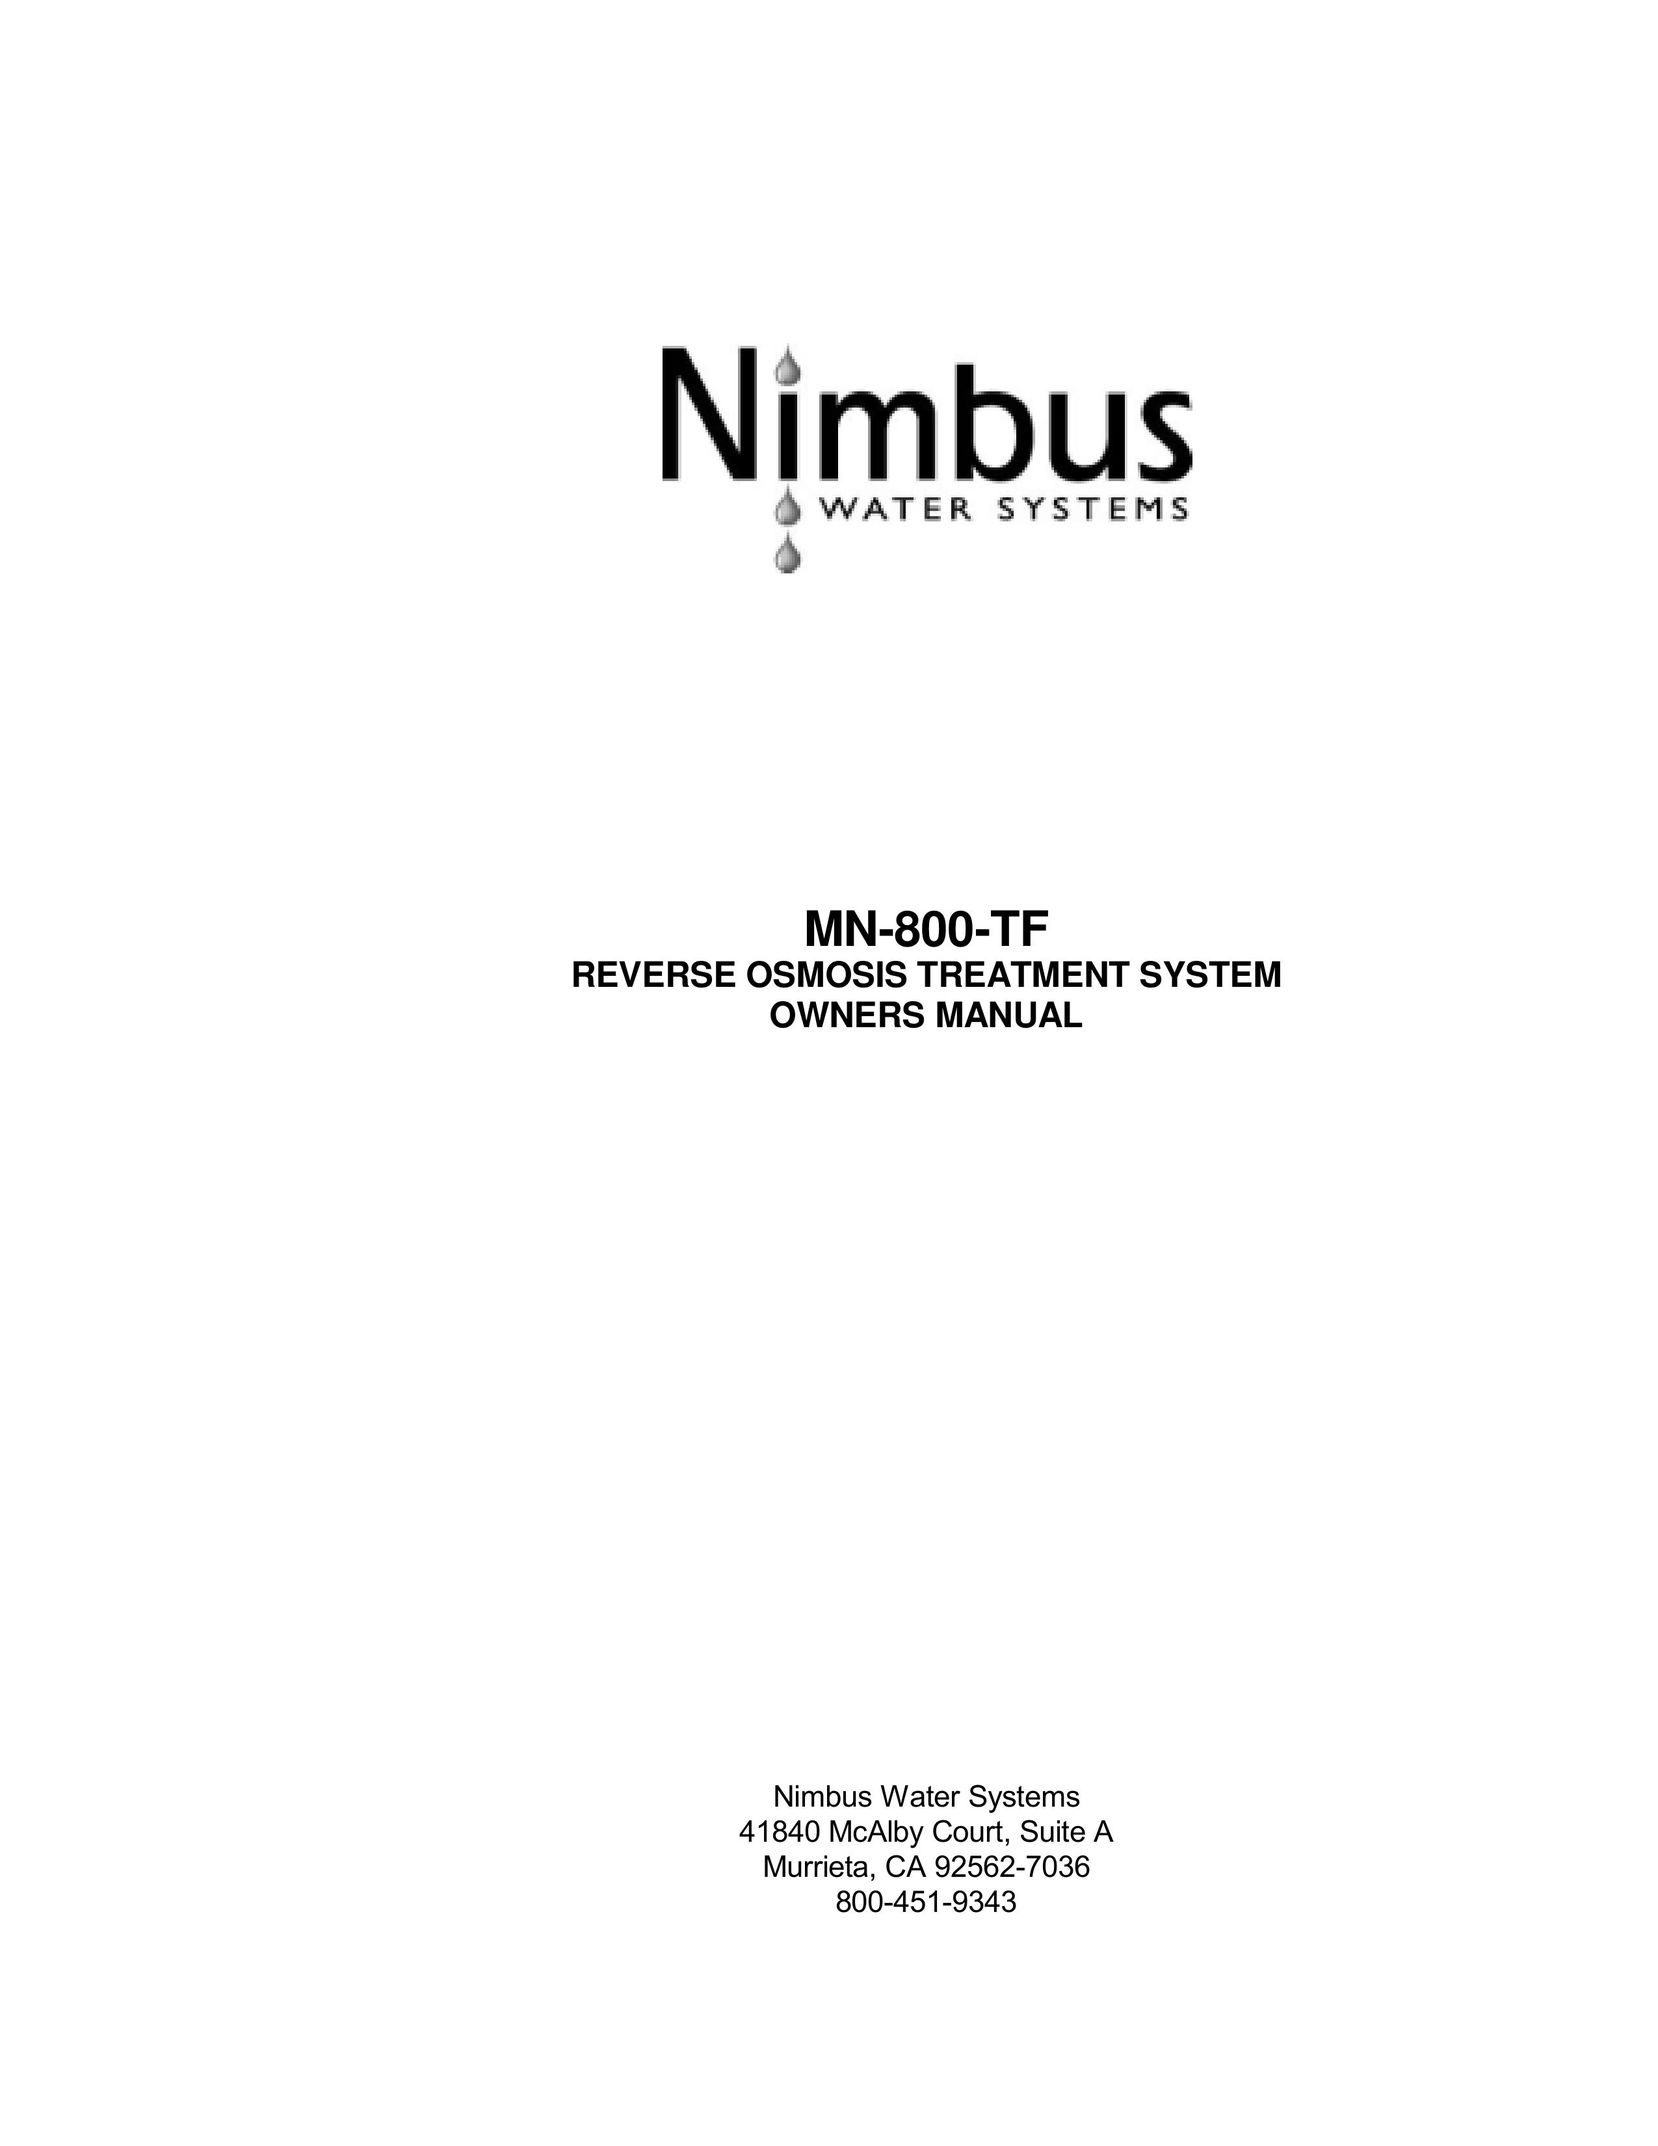 Nimbus Water Systems MN-800-TF Water System User Manual